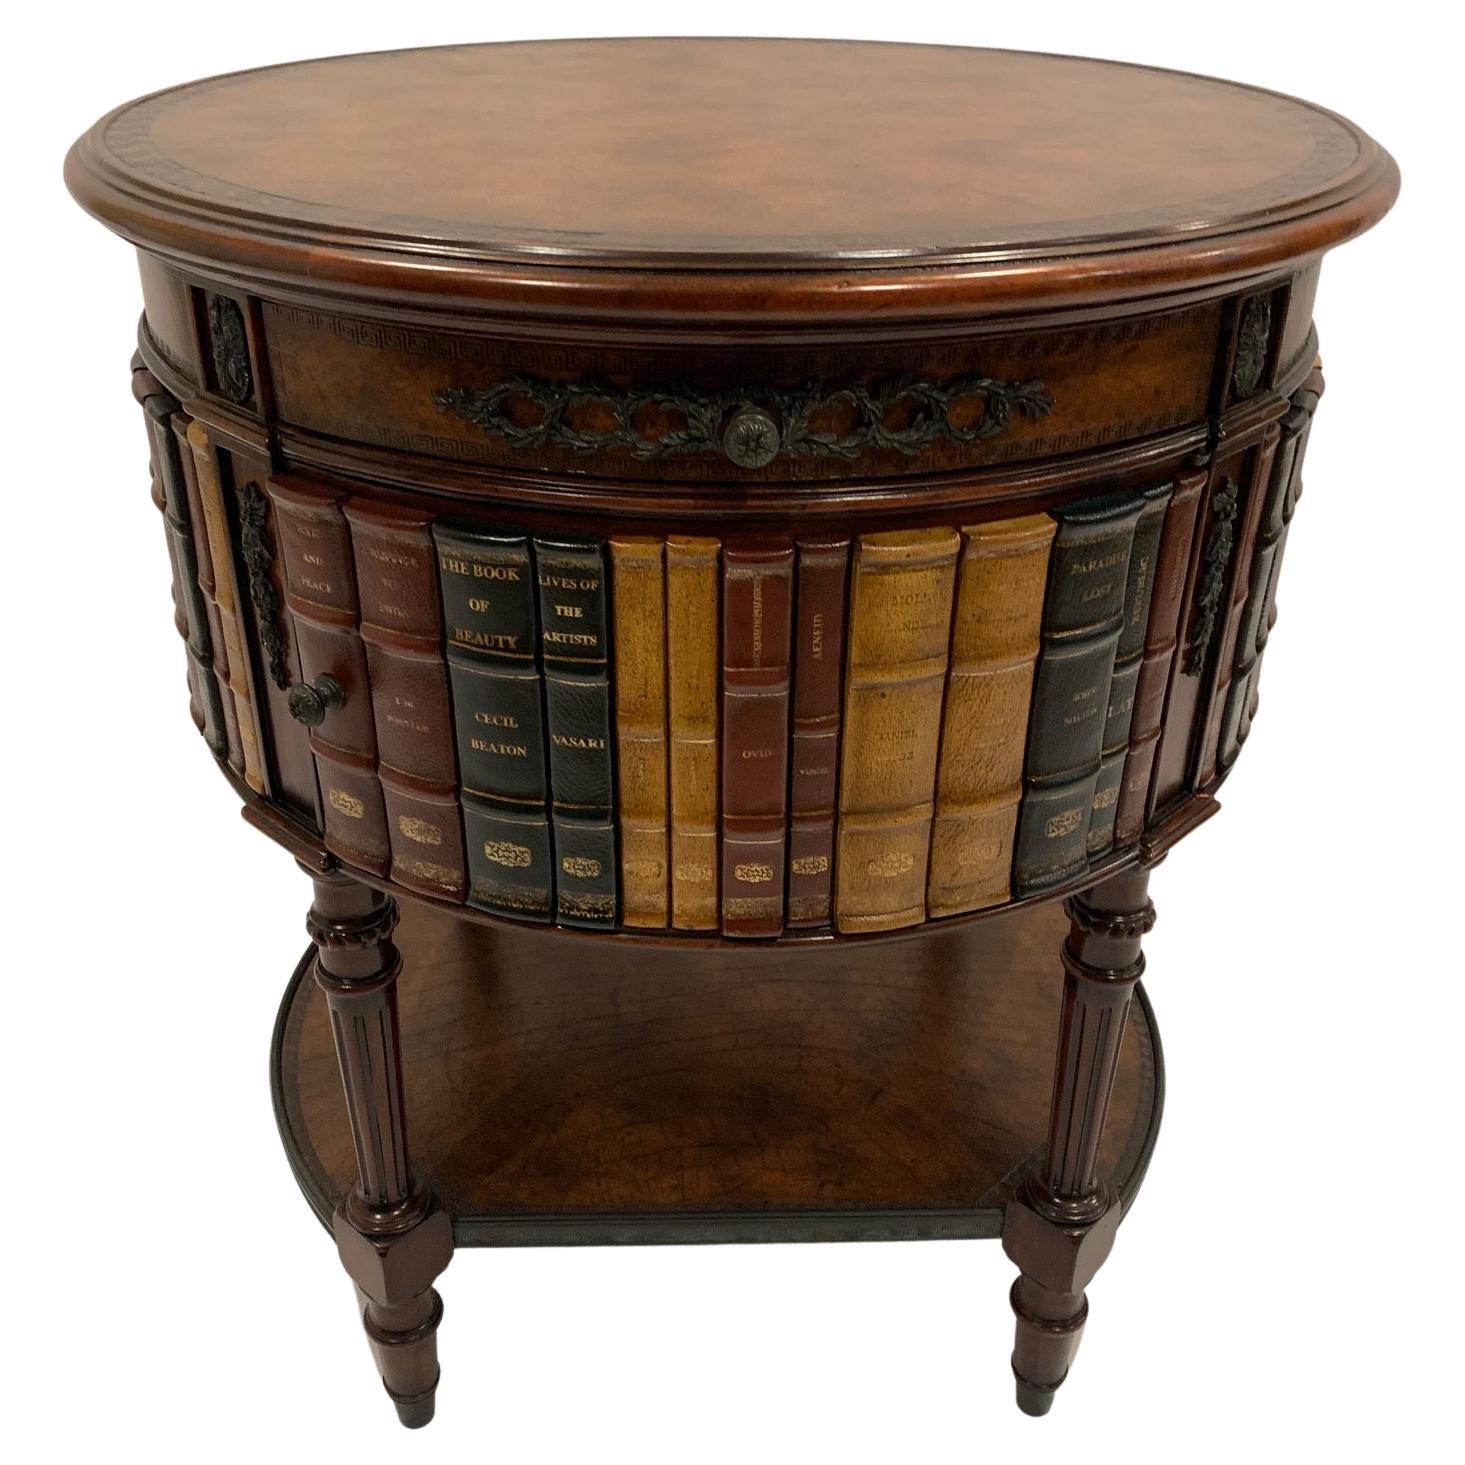 Marvelous Trompe l'oeil Book Motife Round Side Table